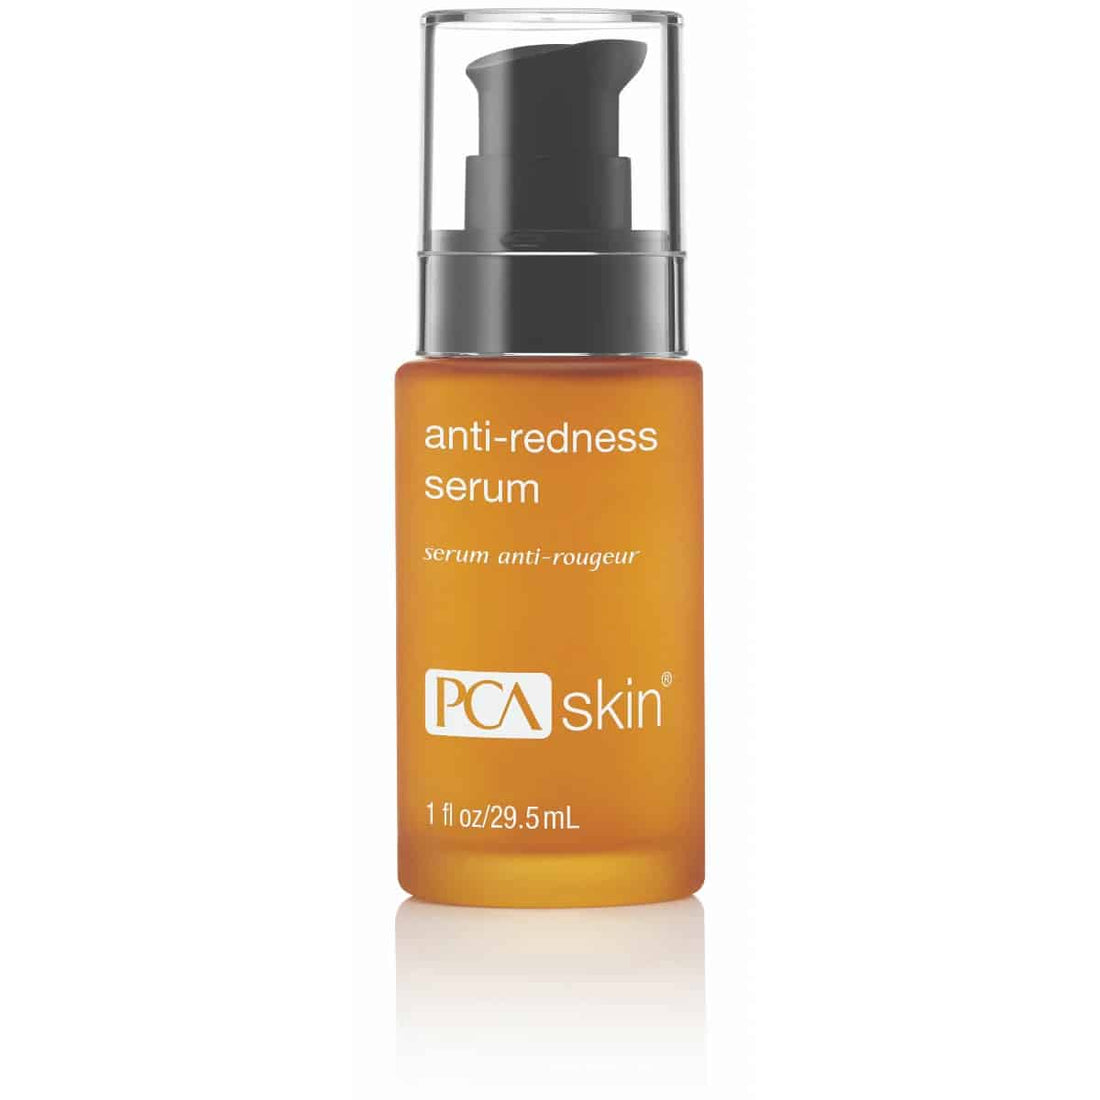 A clear pump bottle labeled &quot;Anti-Redness Serum 30 ml&quot; from PCA Skin, containing 1 fl oz (29.5 mL) of product. The amber-toned bottle features a black pump dispenser and text in white and orange colors, perfect for sensitive skin needing redness relief.